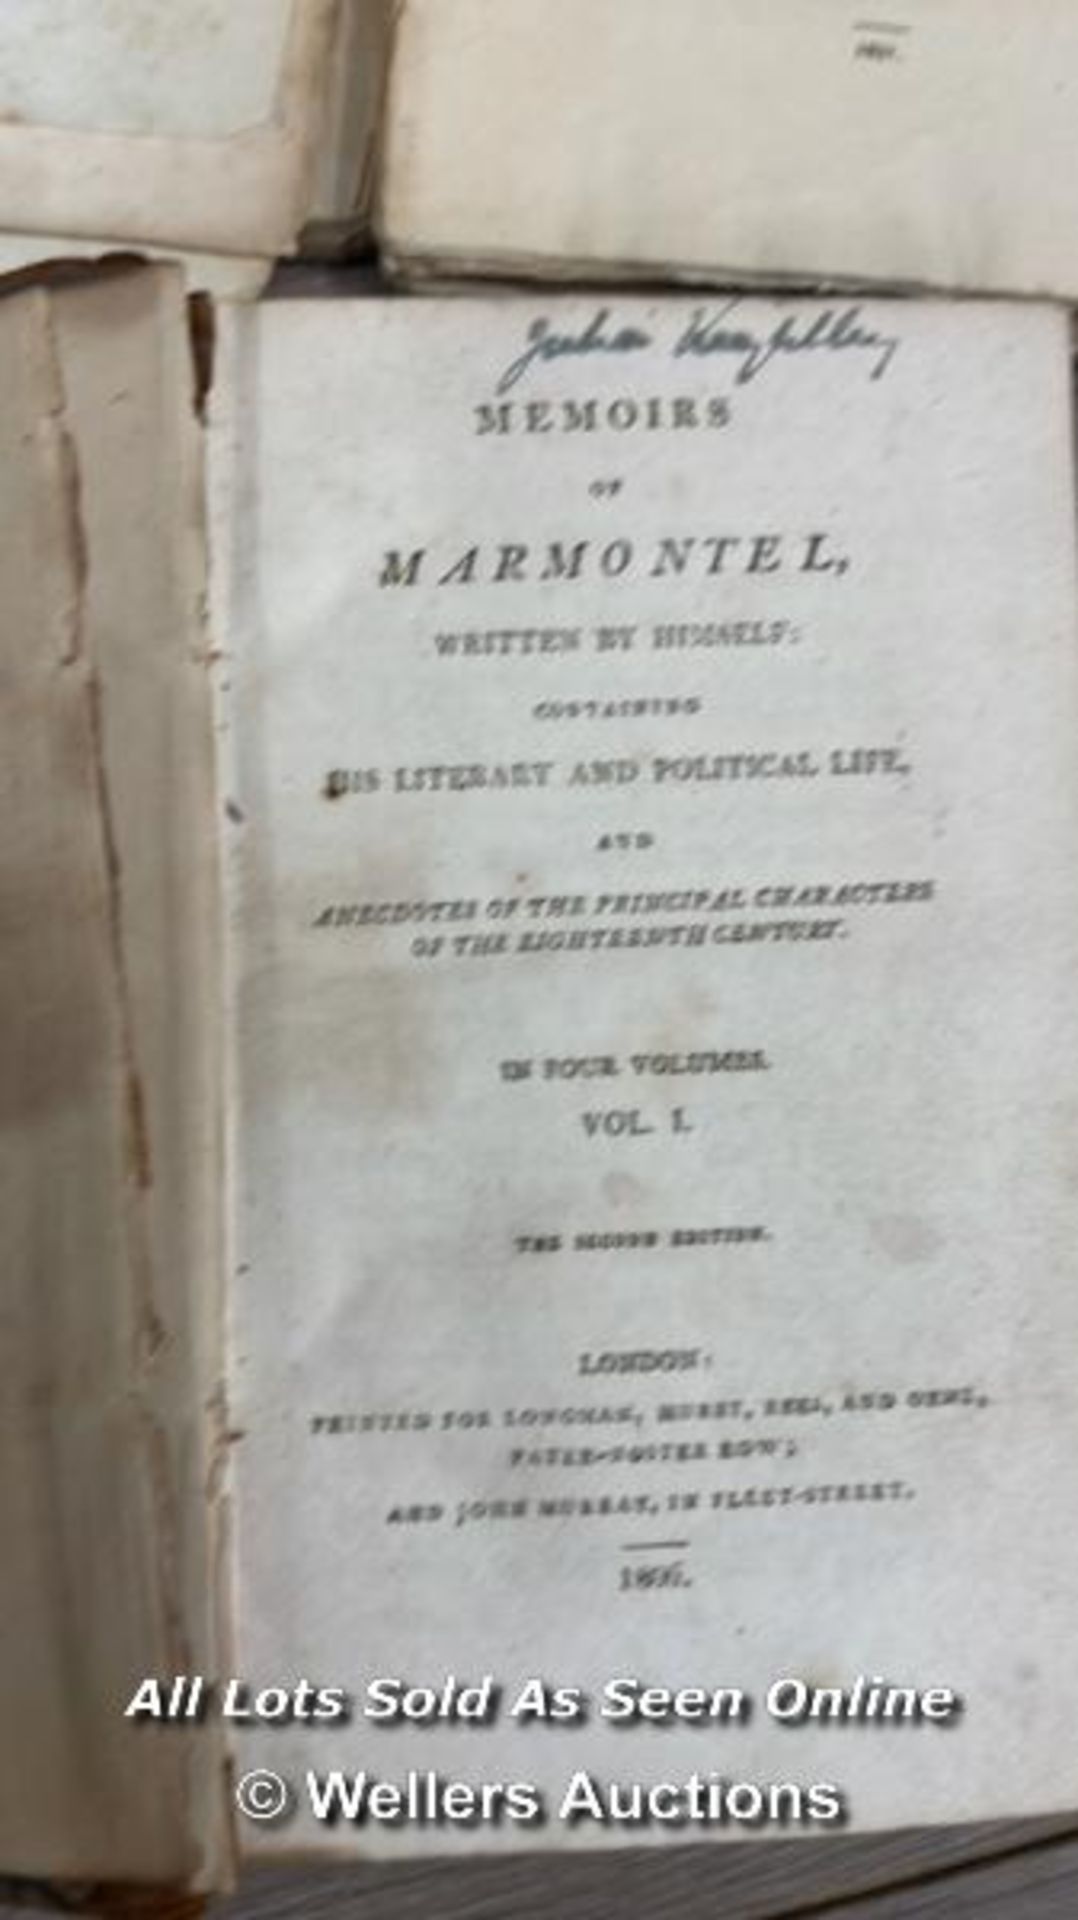 FOUR VERY OLD BOOKS INCLUDING MEMOIRS OF MARMONTEL - Image 2 of 6